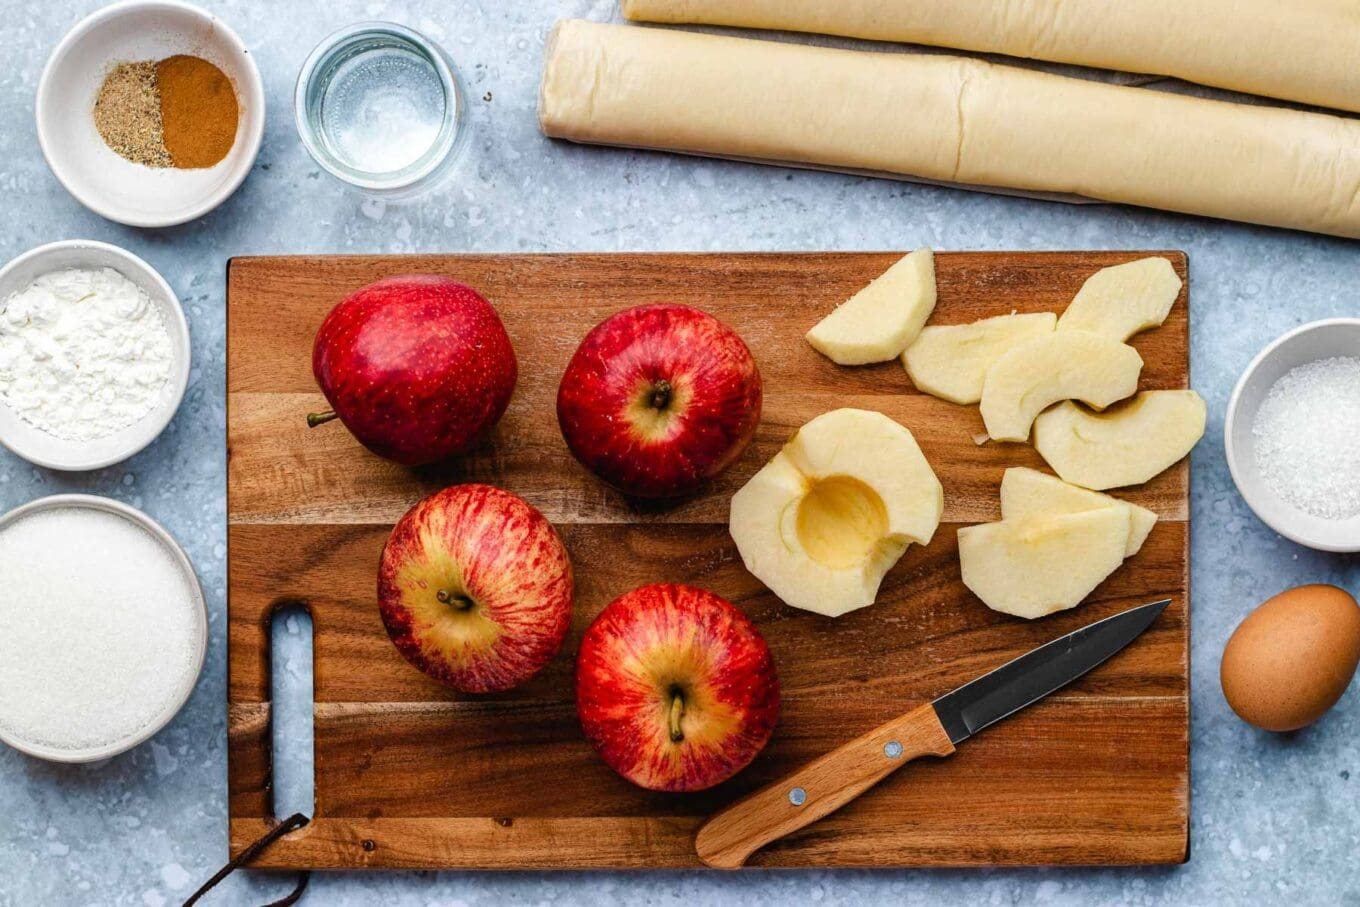 Apple Turnover ingredients spread out in prep bowls and apples on wooden board, some apples chopped, horizontal